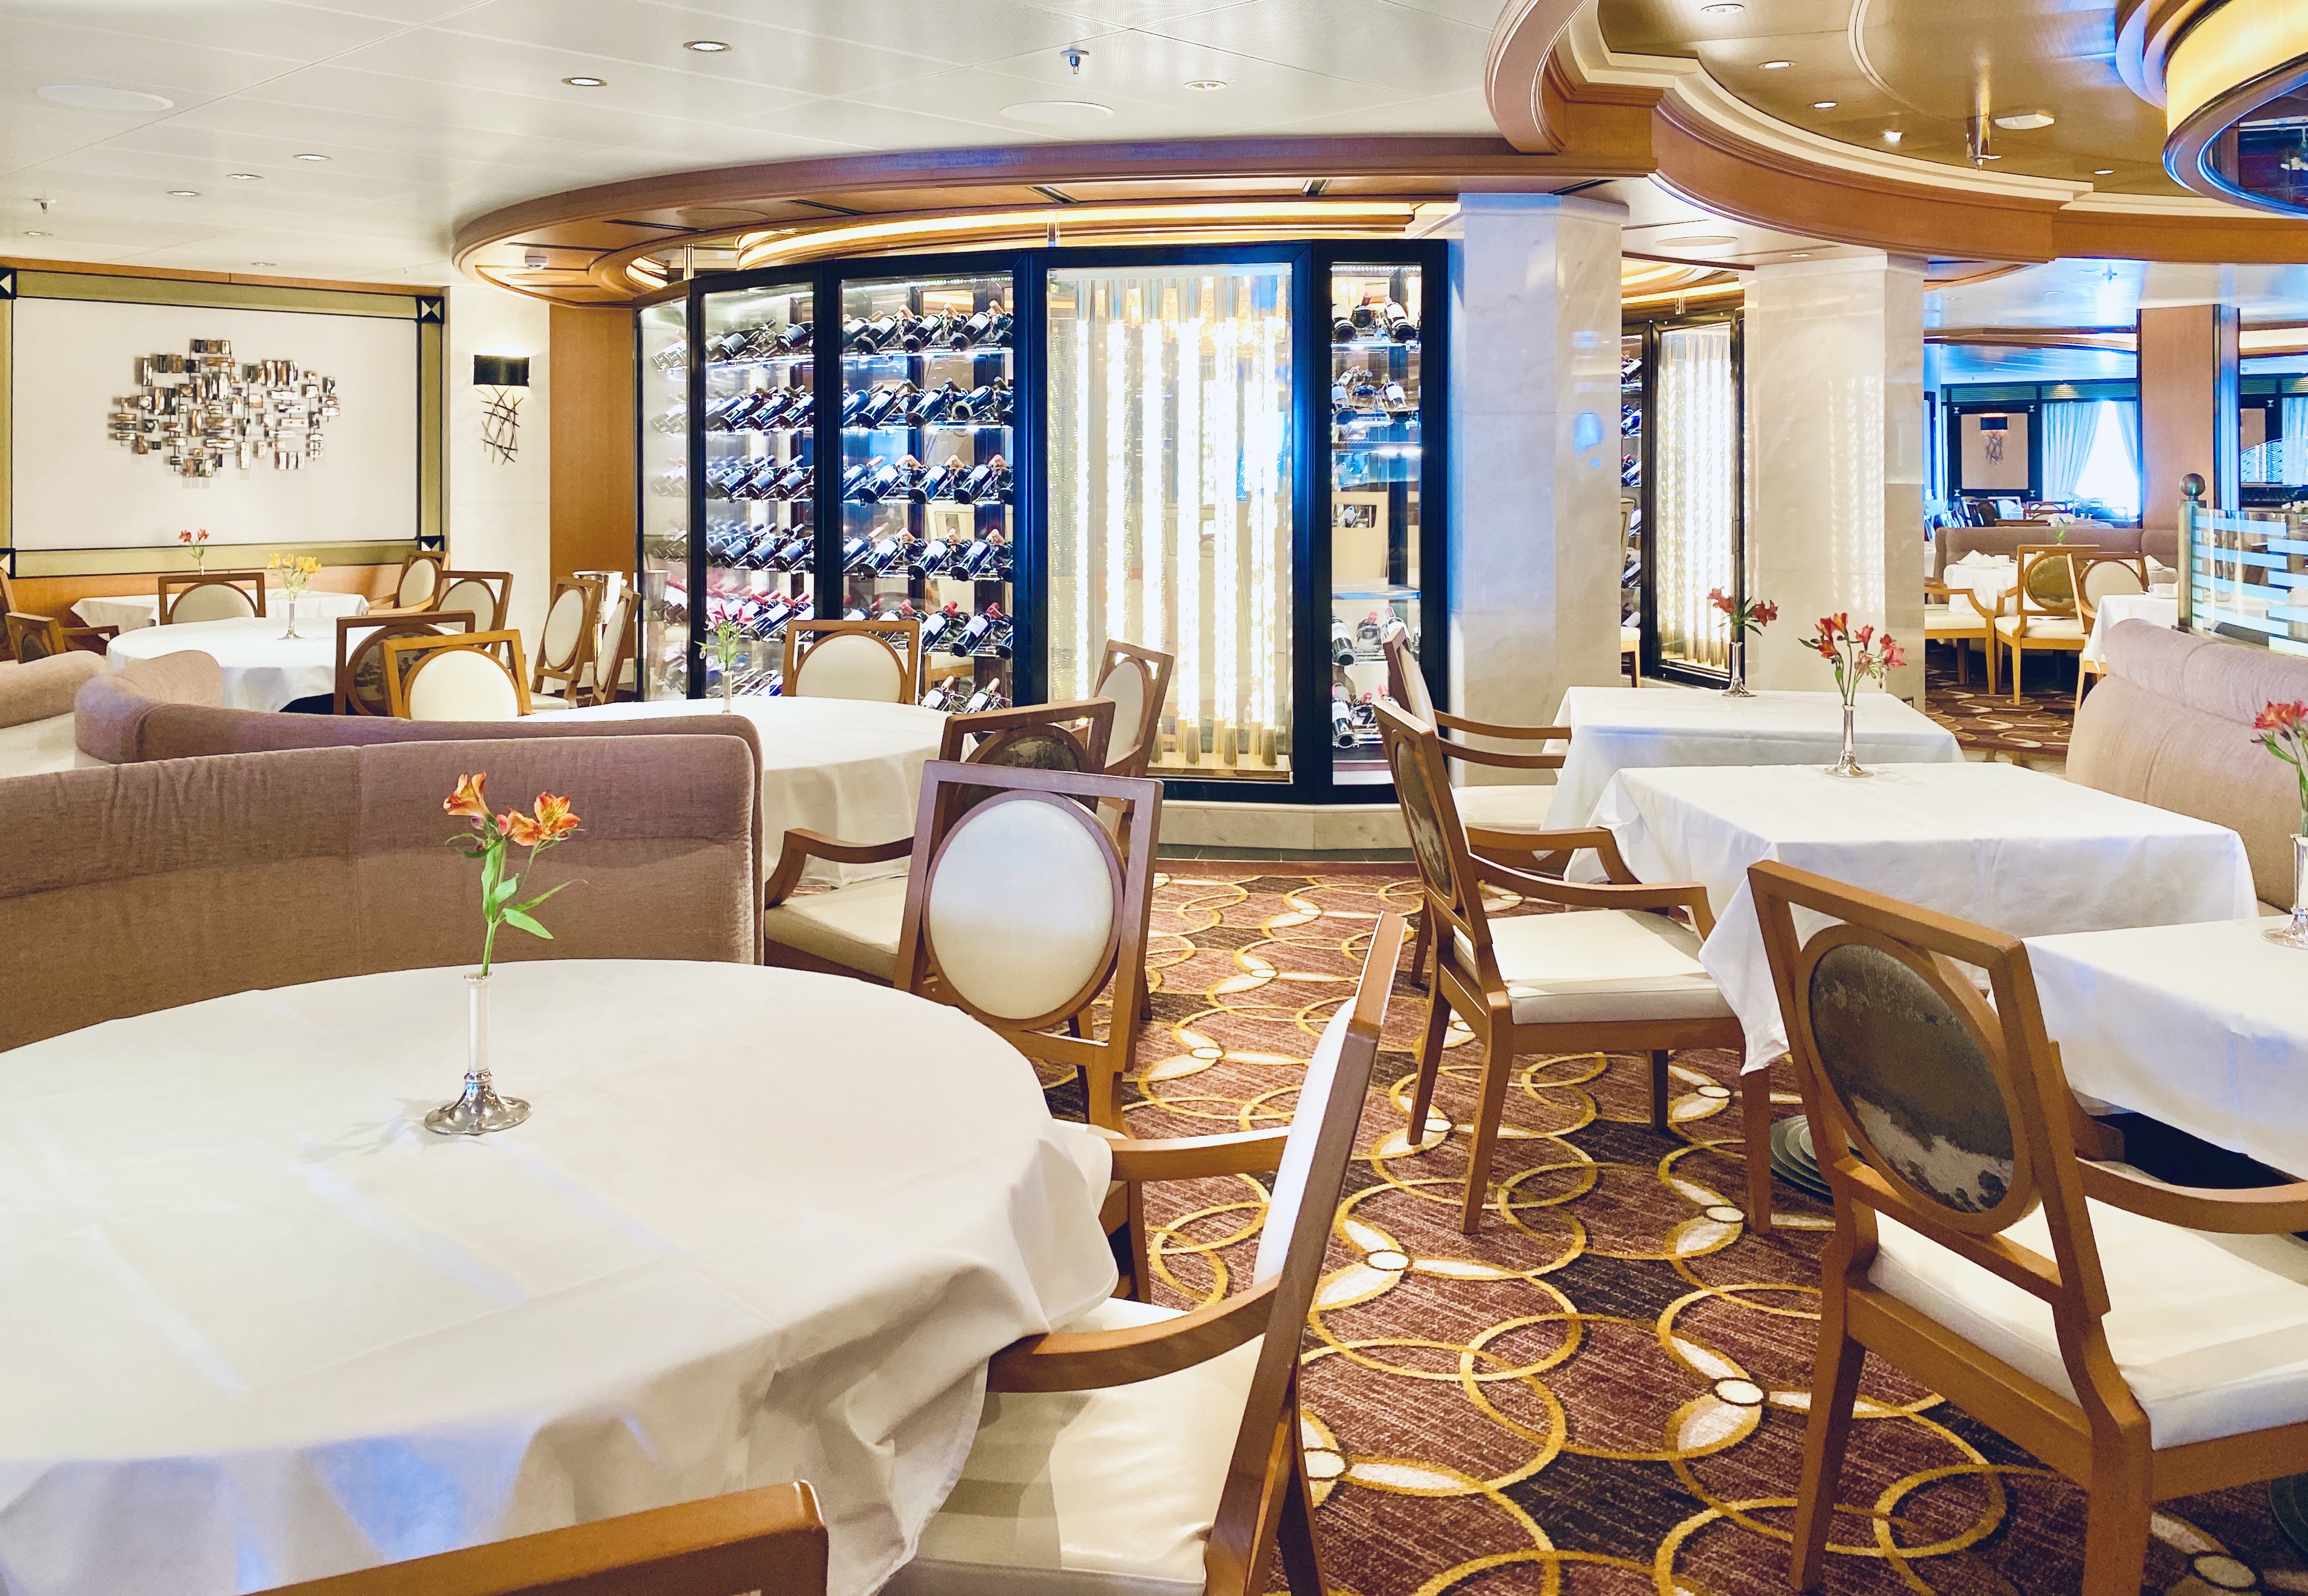 Princess Cruises - Majestic Princess Anytime Dining Room - Giddy Guest